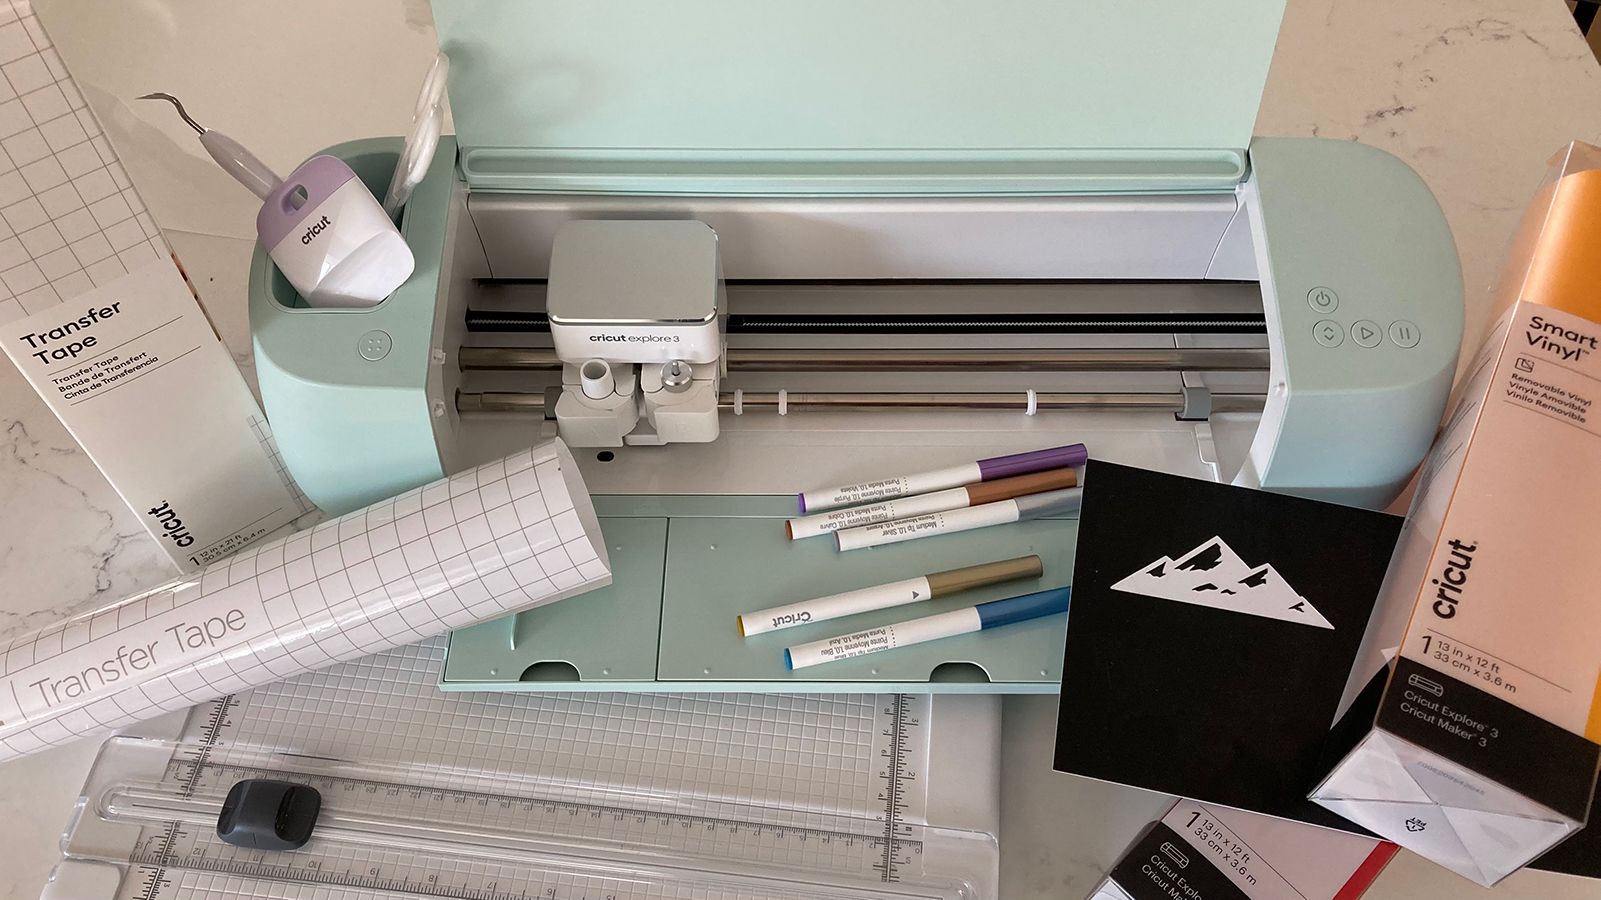 Cricut review: Is this crafting machine worth the investment?